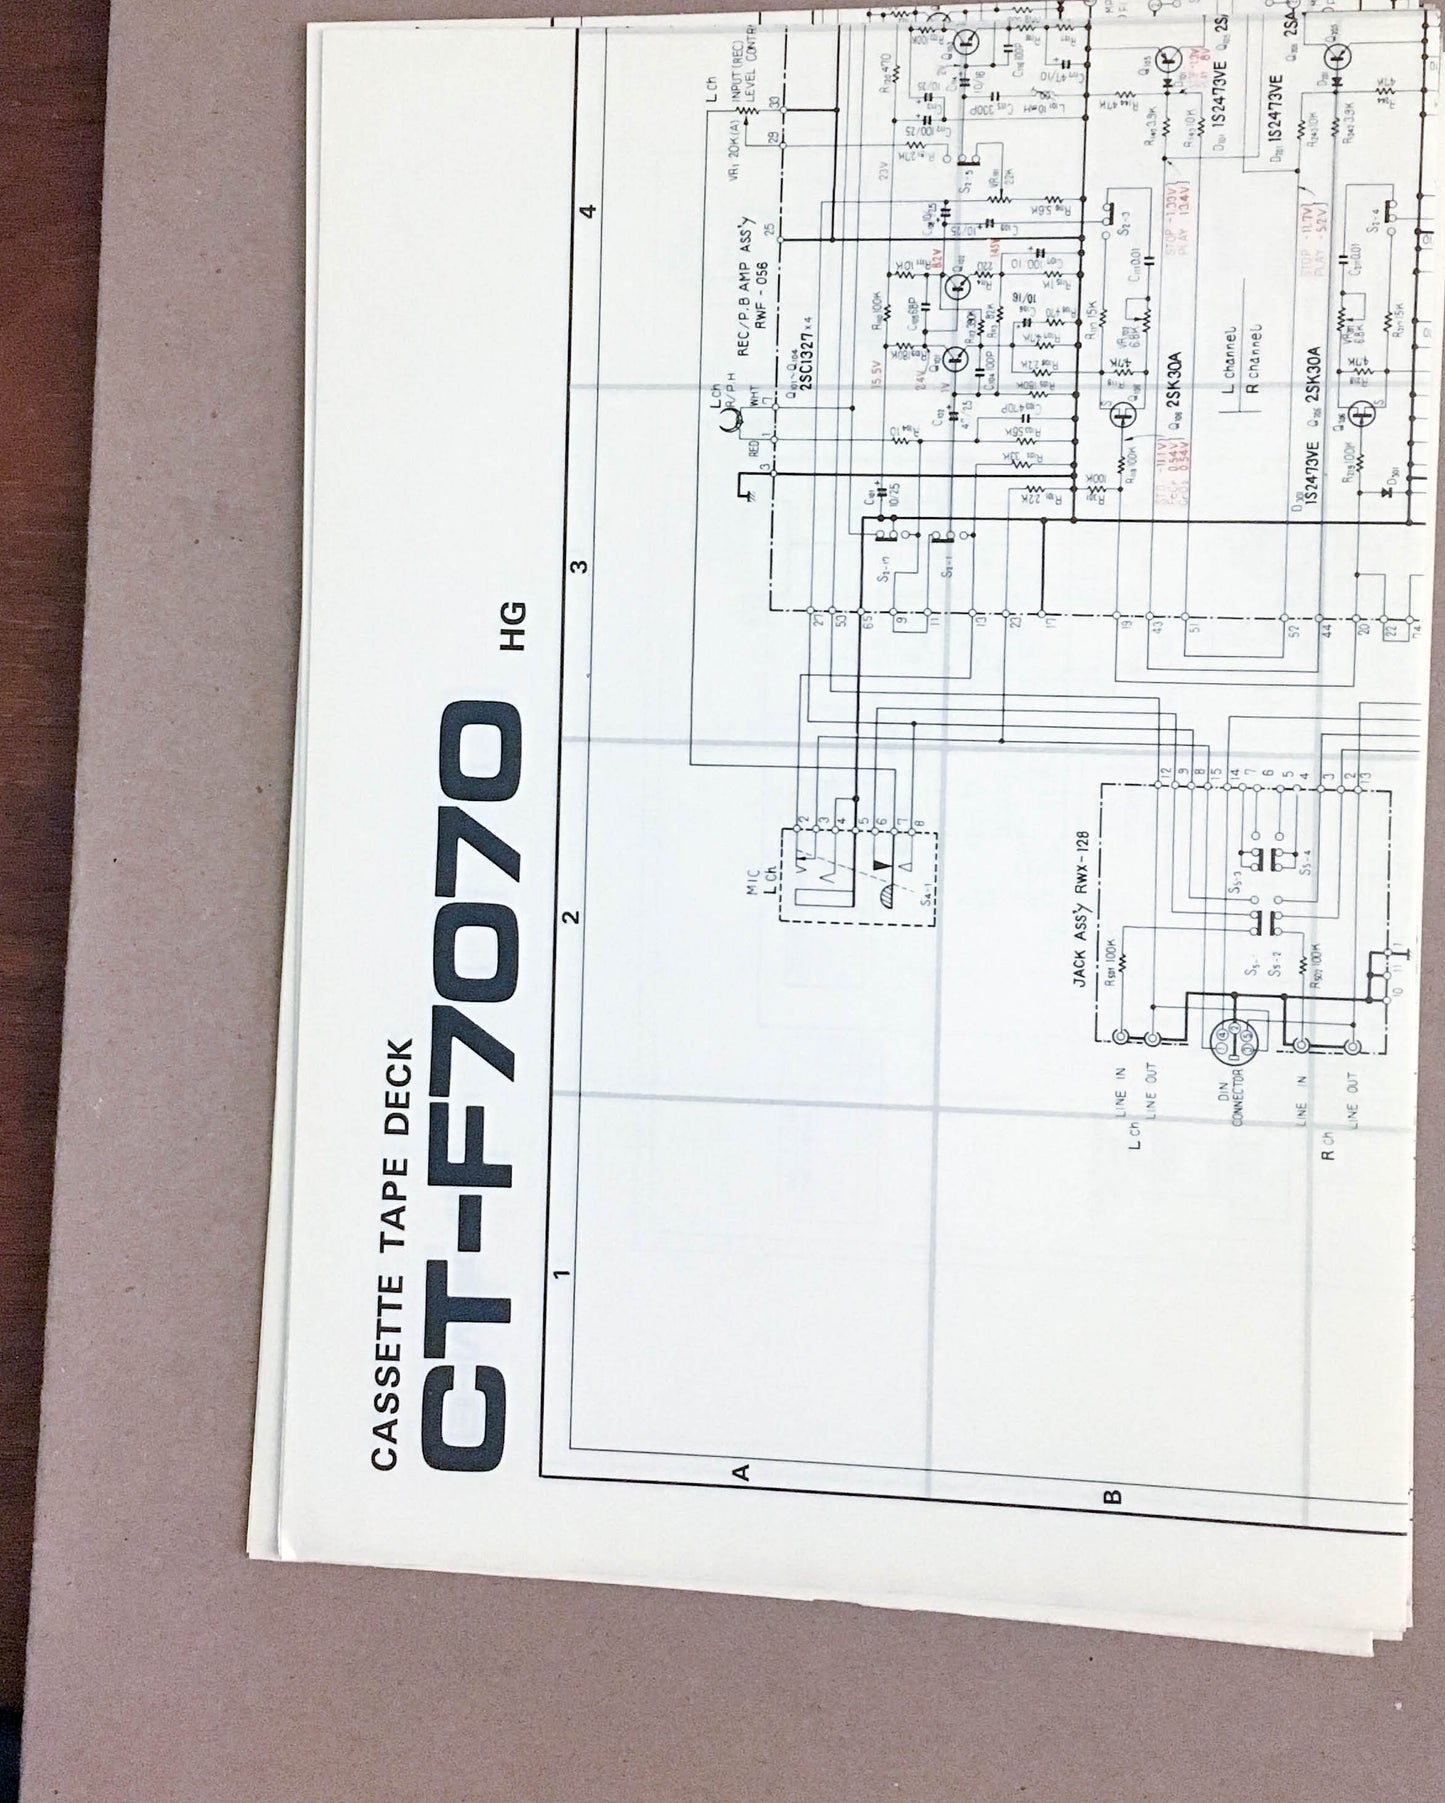 Pioneer CT-F7070 Cassette Deck  Large Fold Out Schematic *Original*